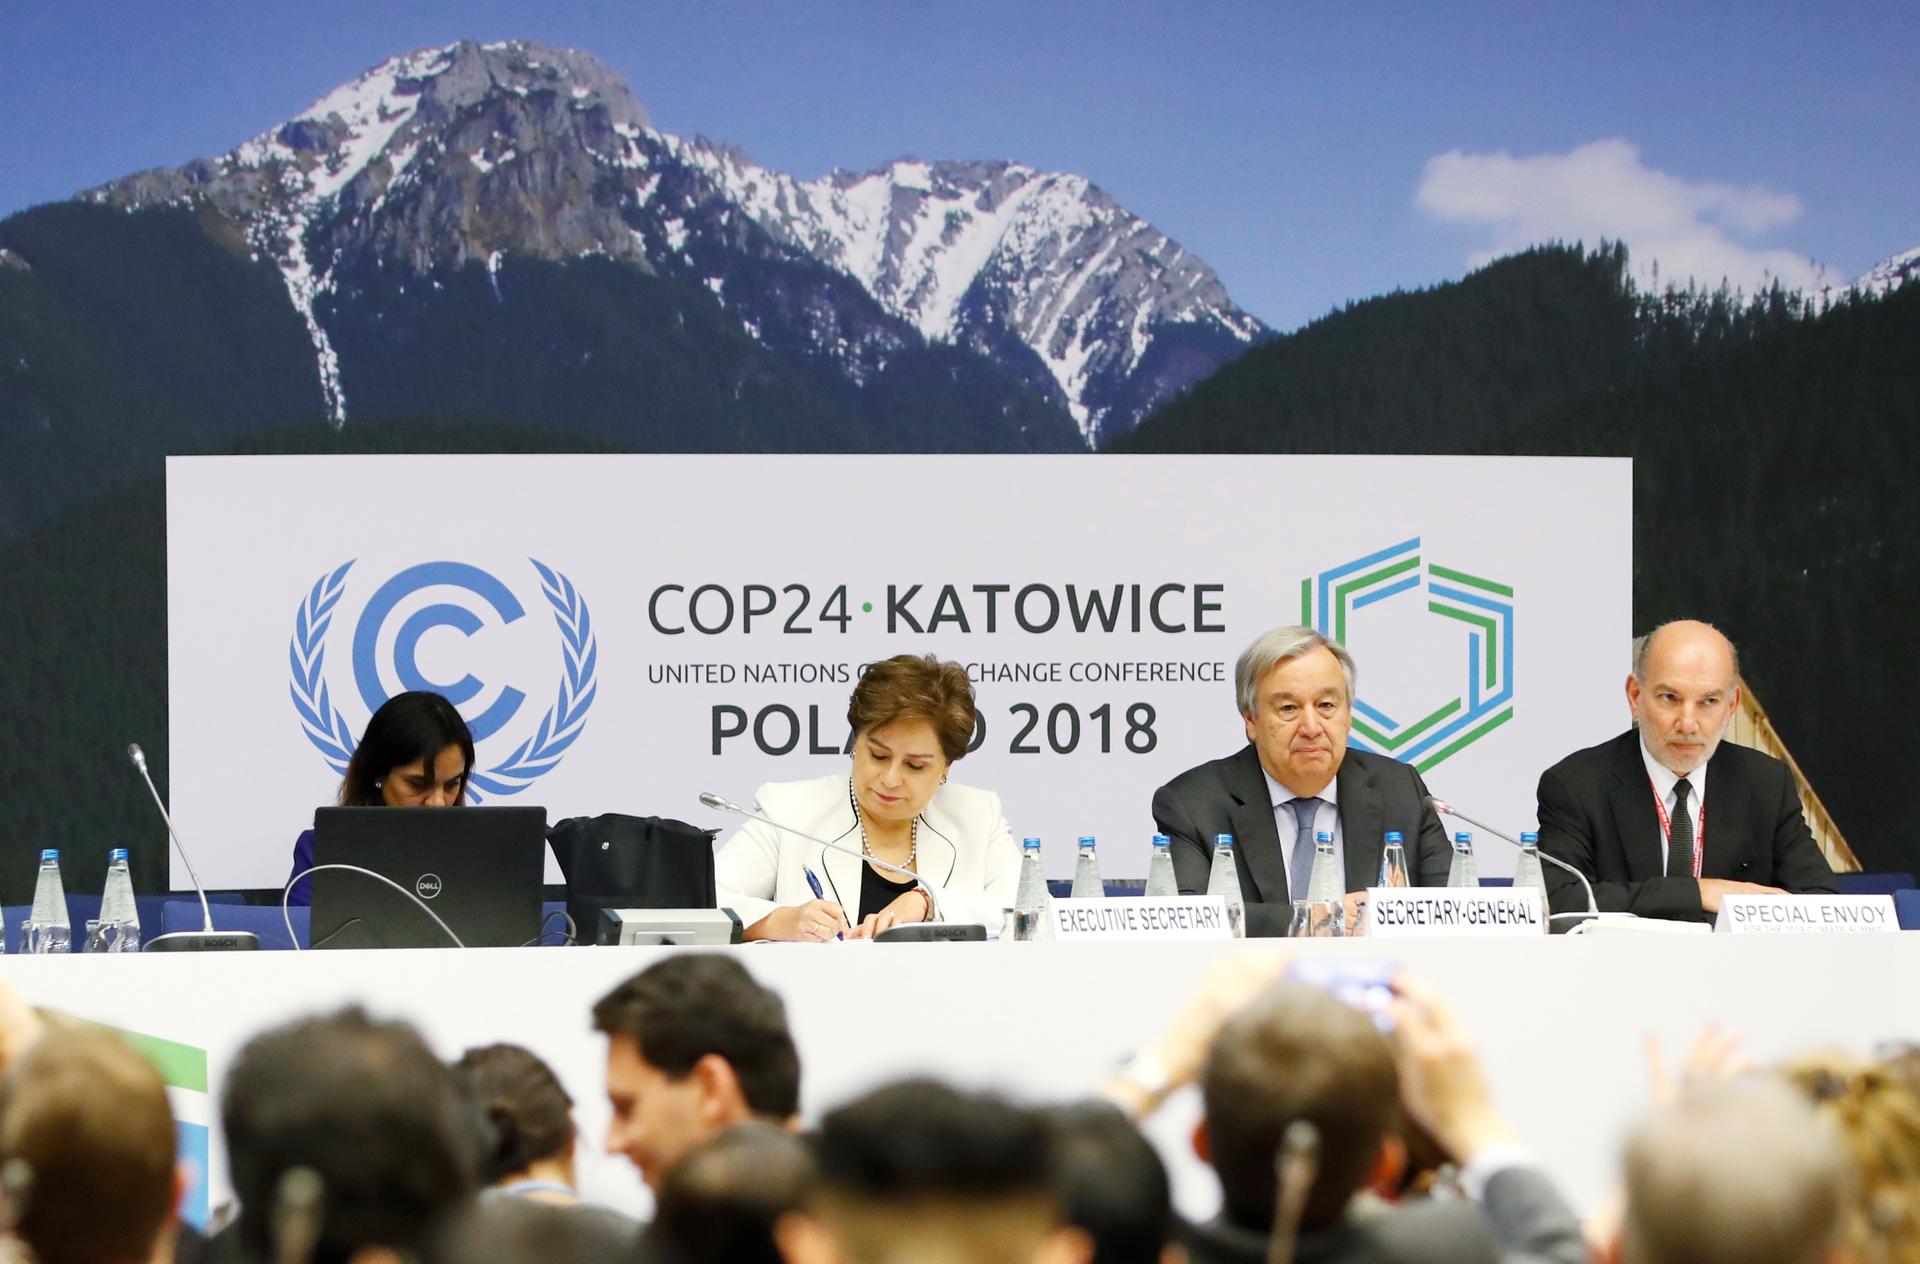 COP 24 session in Katowice, Poland